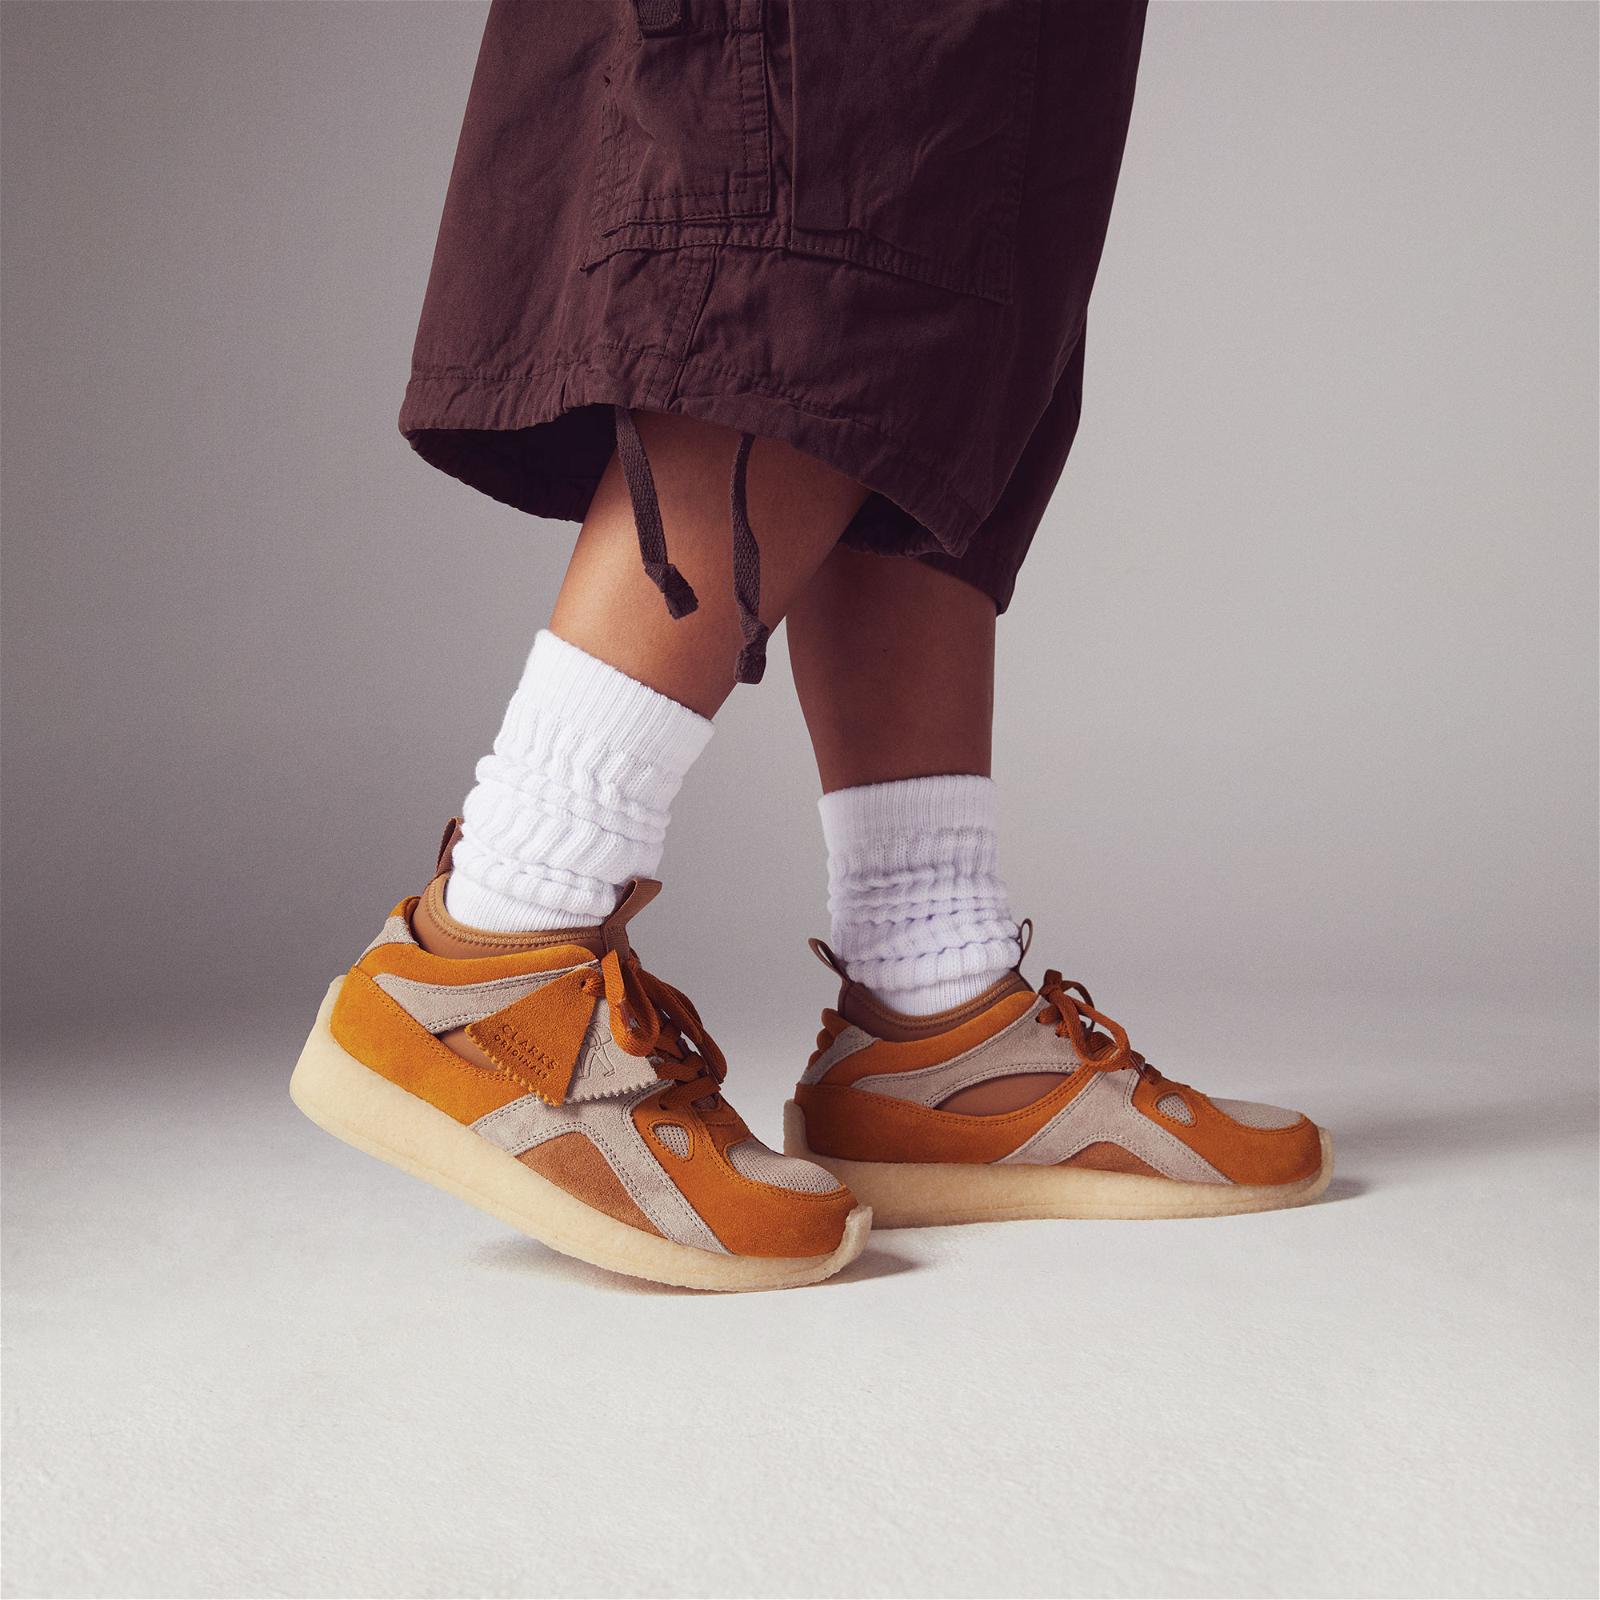 8th St. by Ronnie Fieg for Clarks Originals SS23 Collection